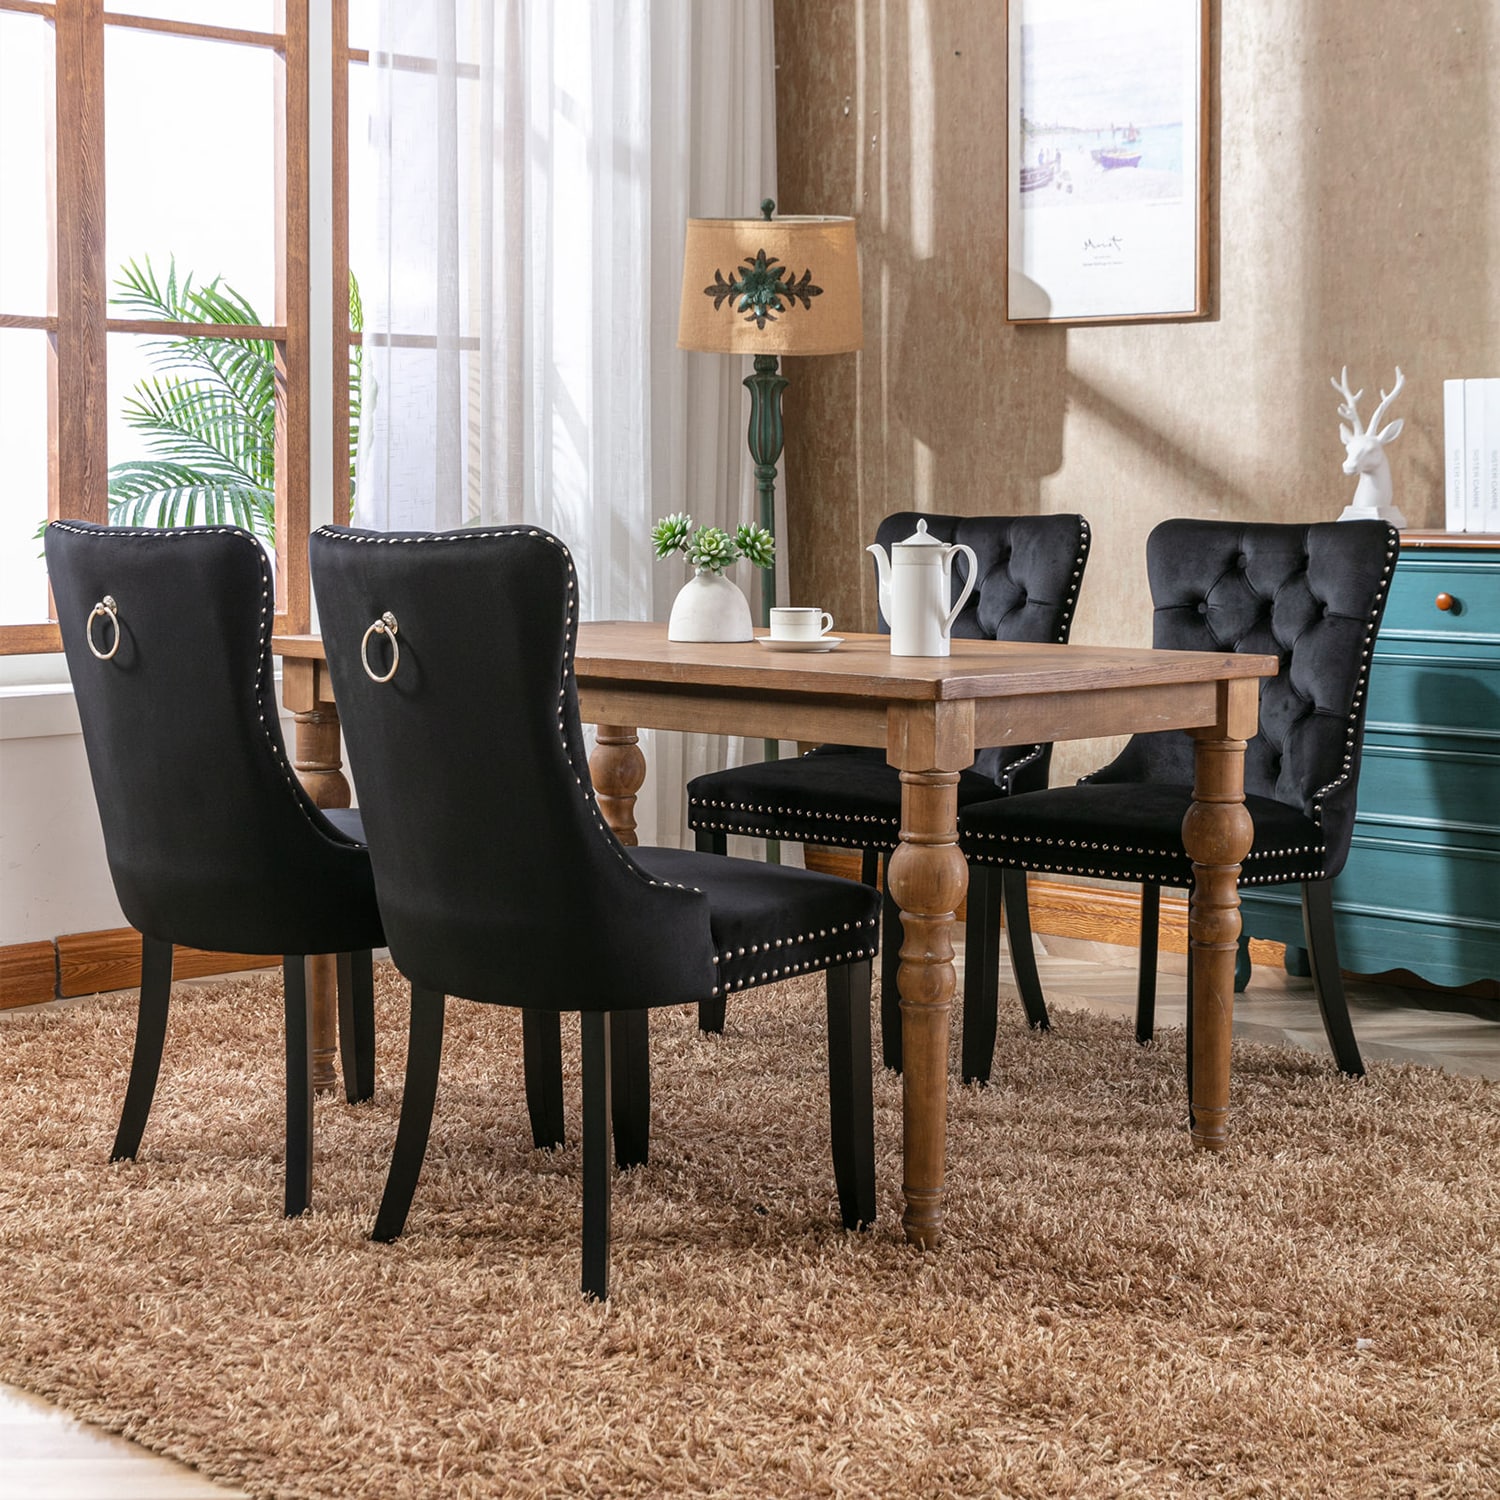 Frame) Set Chair at GZMR Upholstered Velvet the Upholstered in (Wood Contemporary/Modern Dining Dining 2-Pcs department Side Dining Chair Chairs Velvet